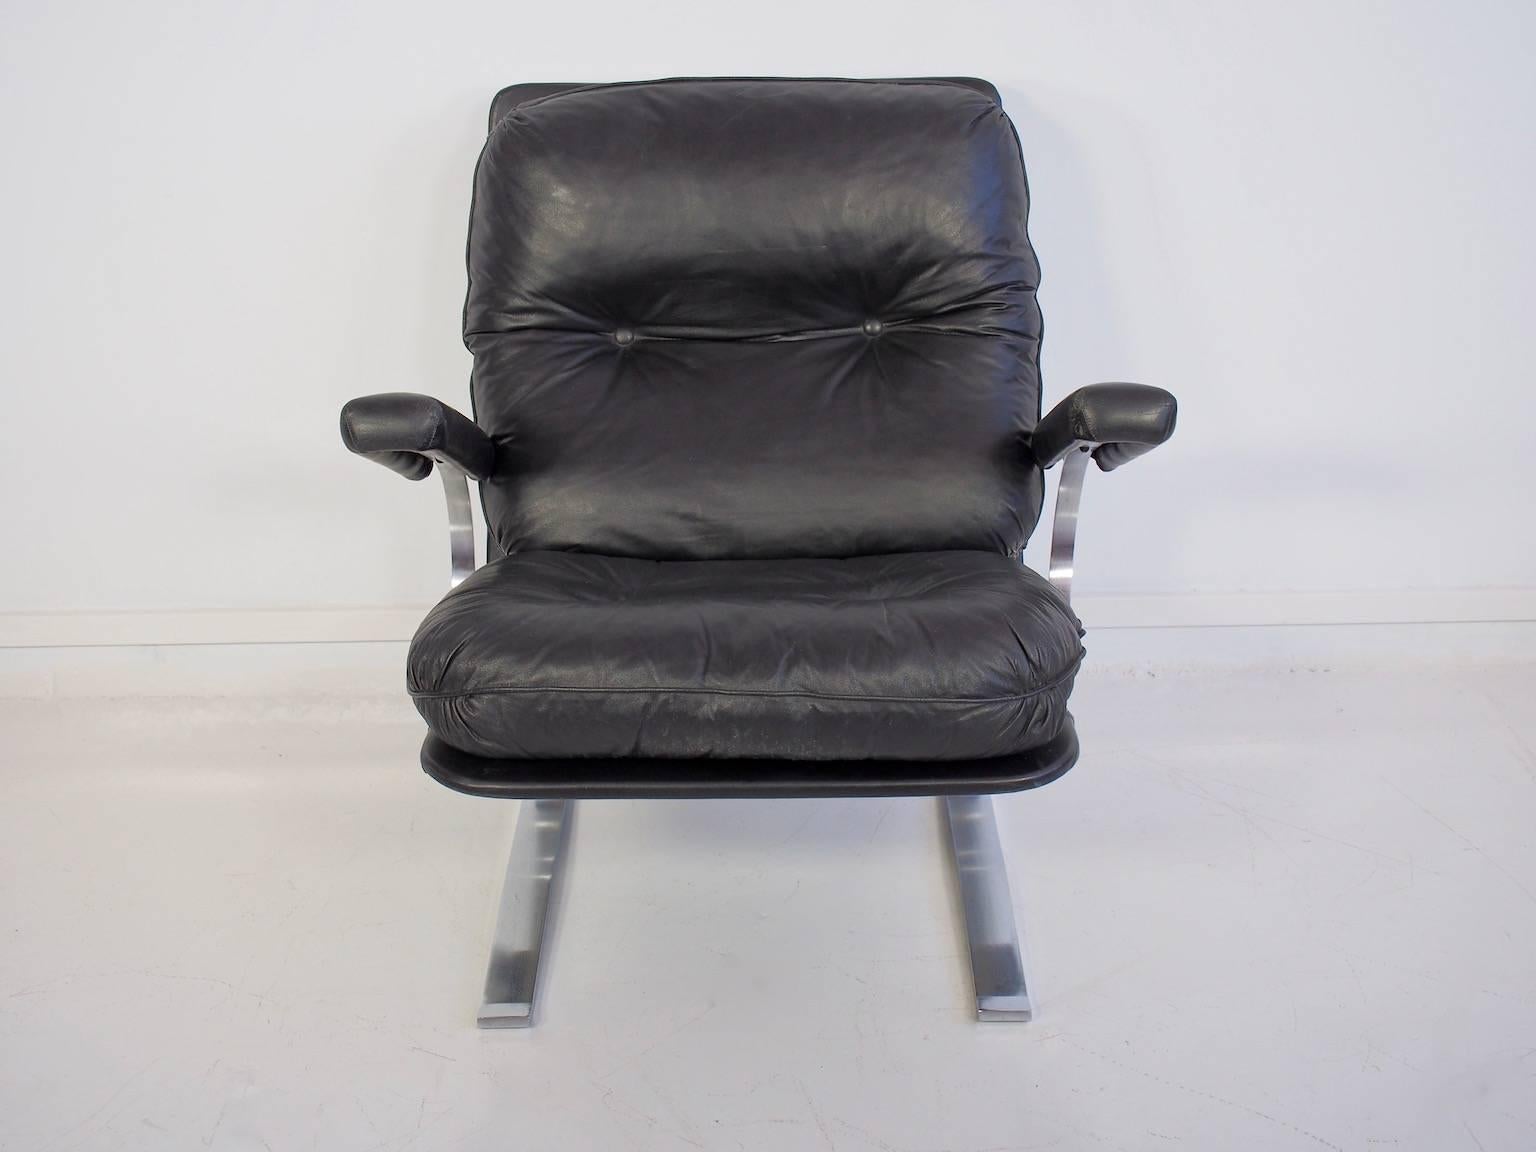 Mid-Century leather armchair. Soft black leather and chrome steel armchair with detachable cushions. Very comfortable.